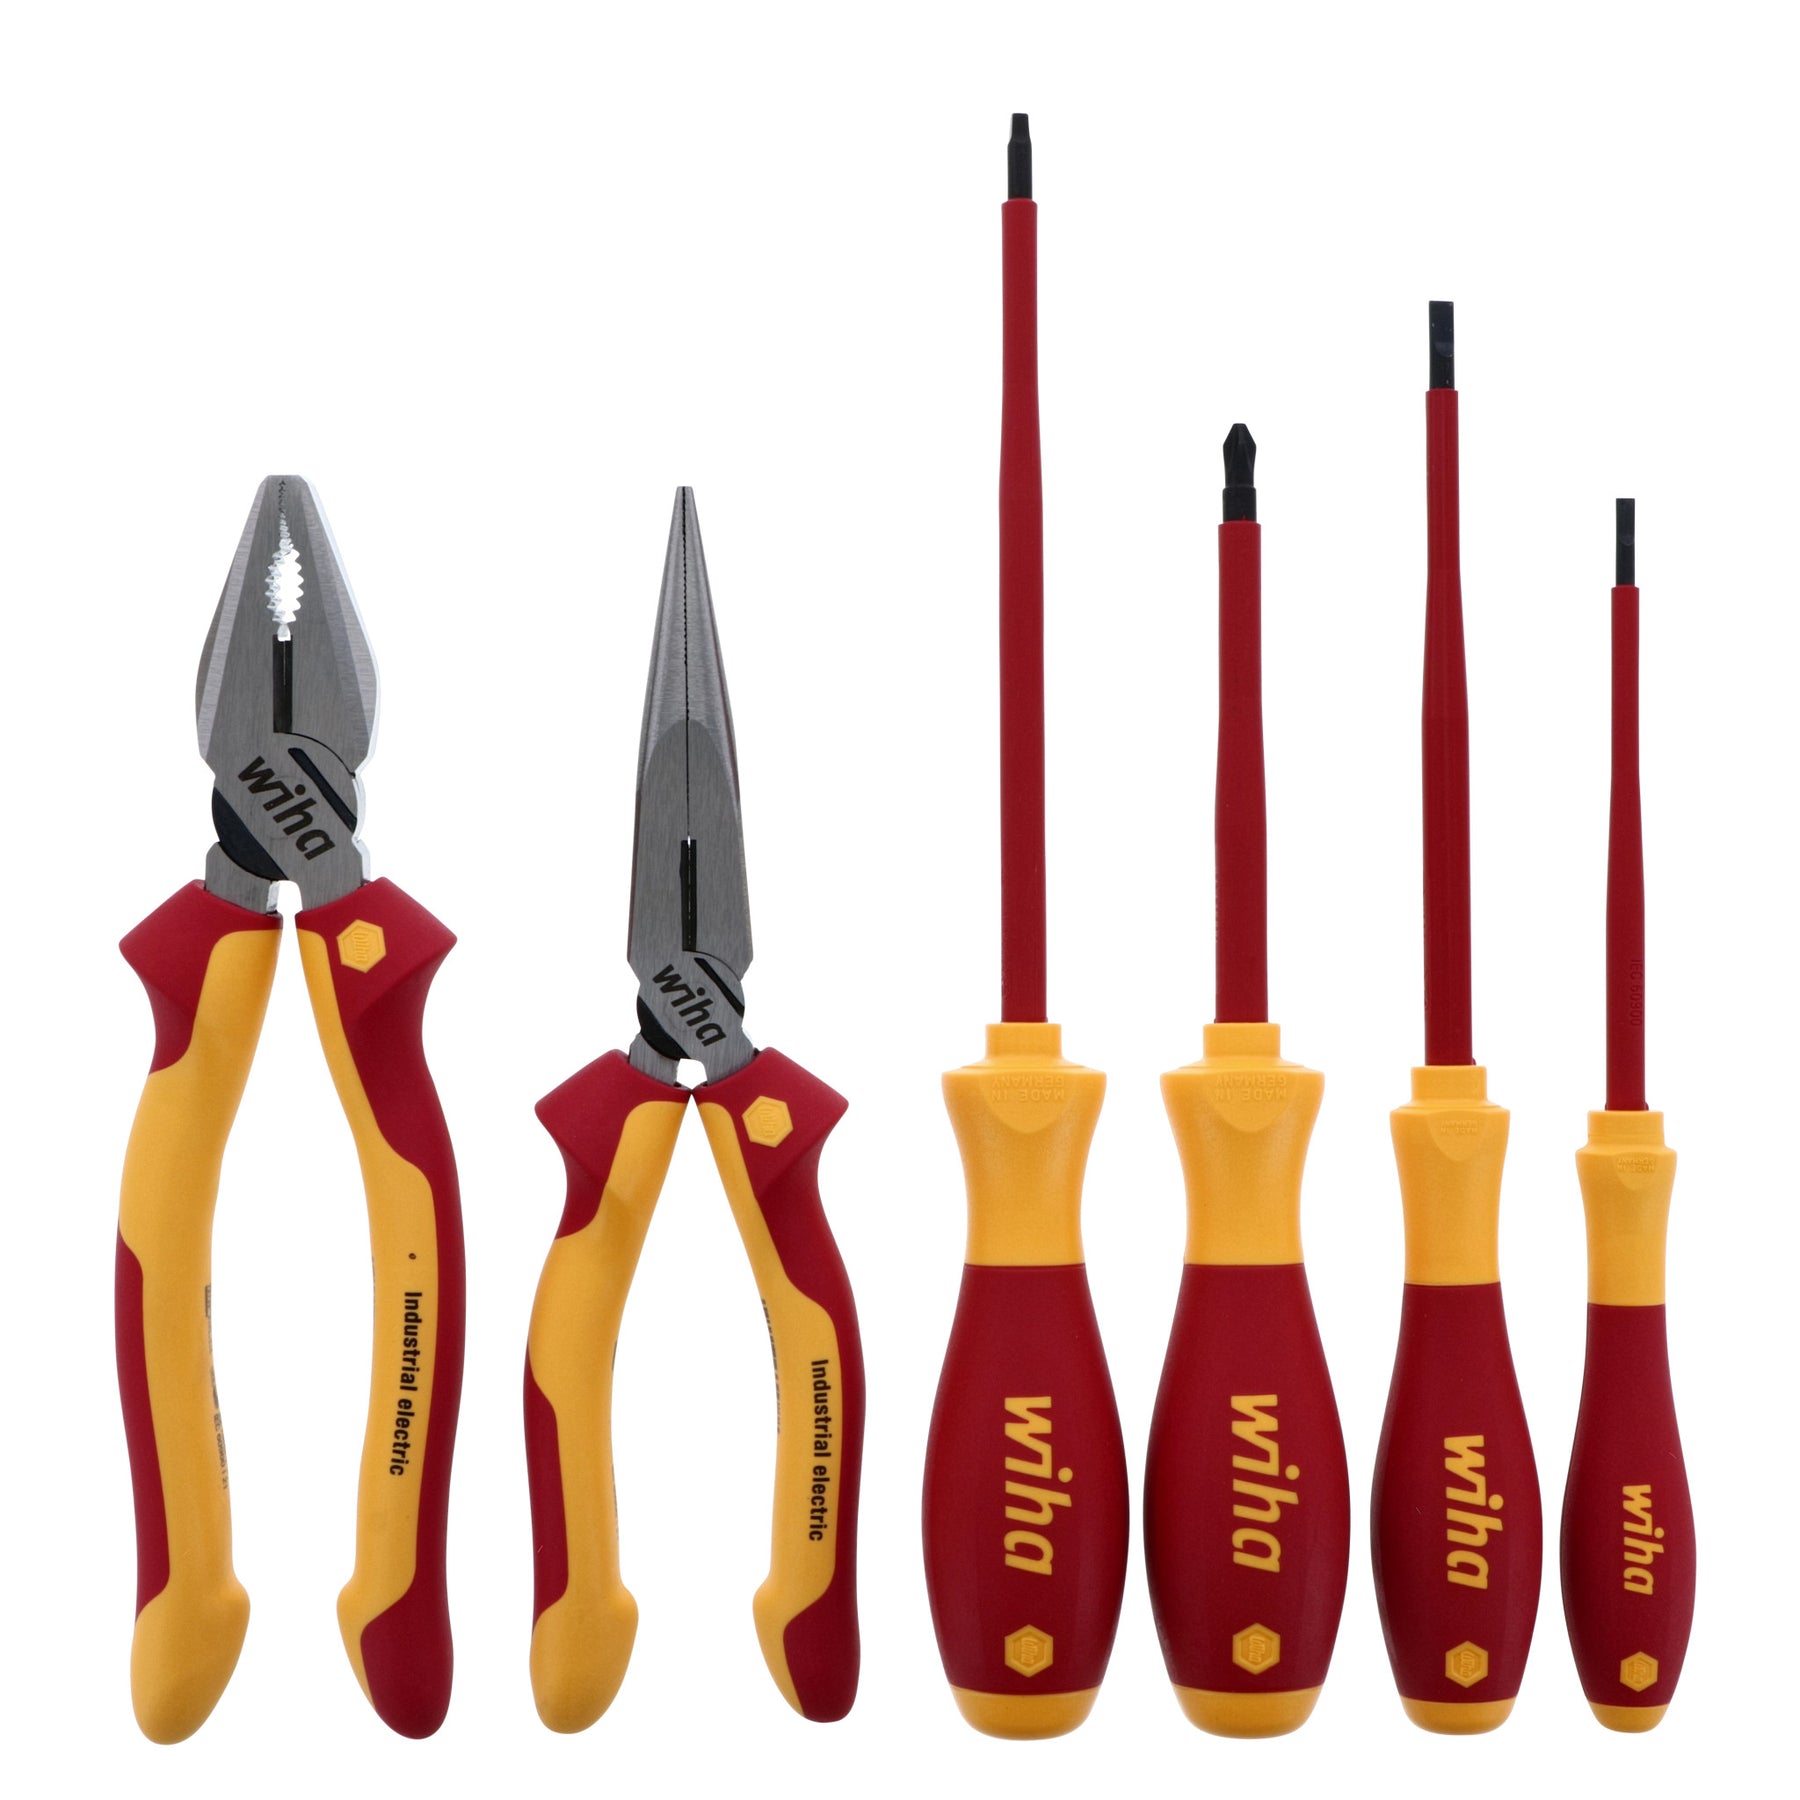 Wiha 32984 6 Piece Insulated Industrial Pliers and Screwdriver Set